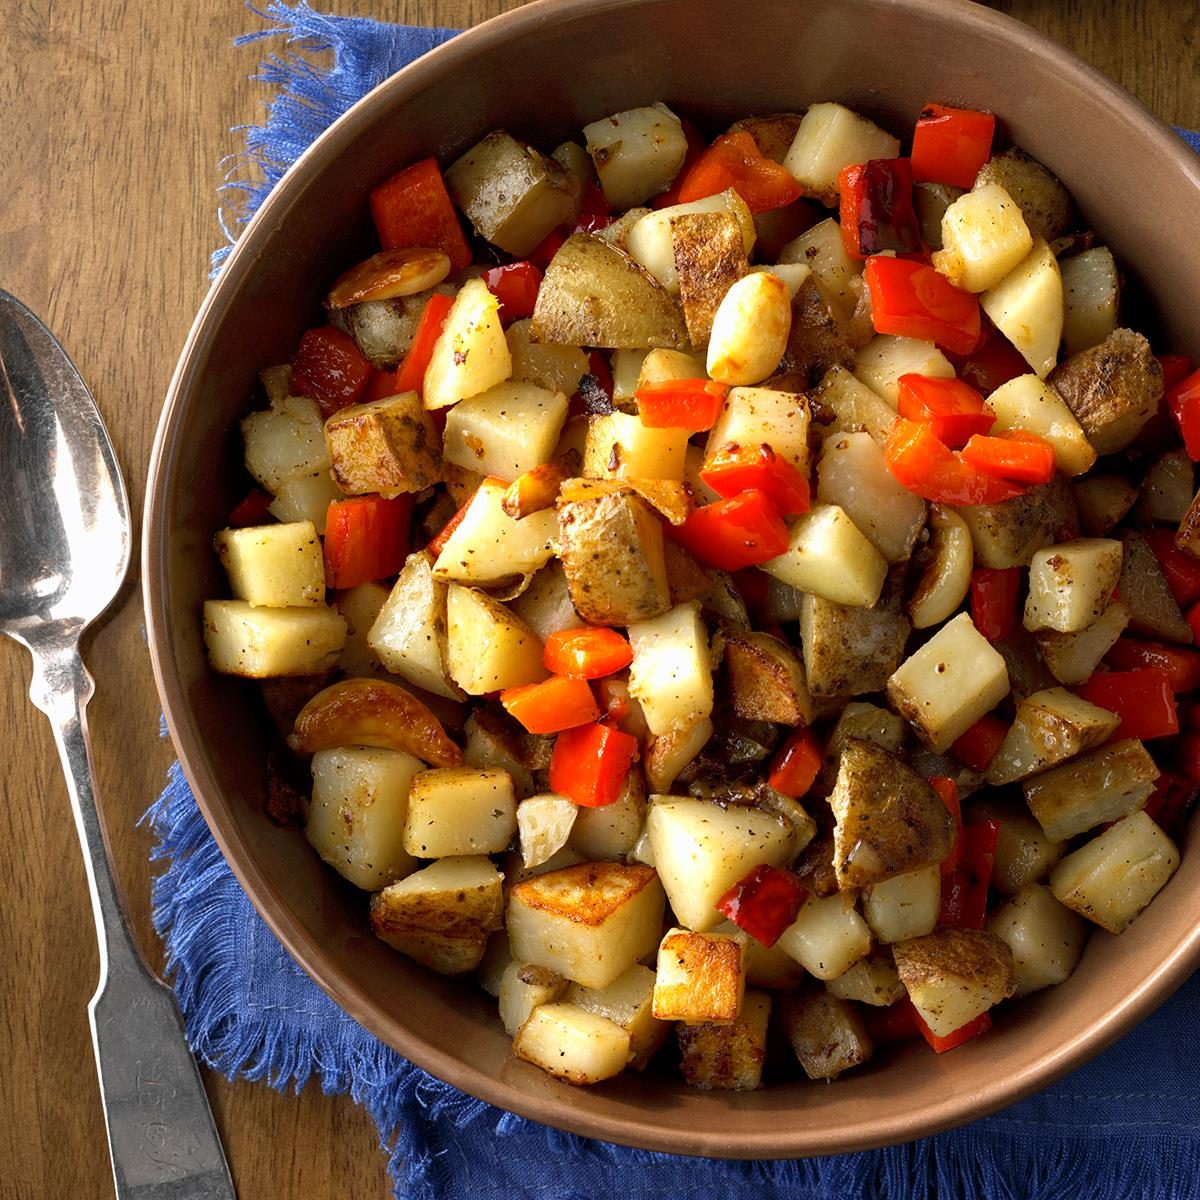 Skillet Potatoes With Red Pepper And Whole Garlic Cloves Exps Hca18 111827 C11 02 5b 9